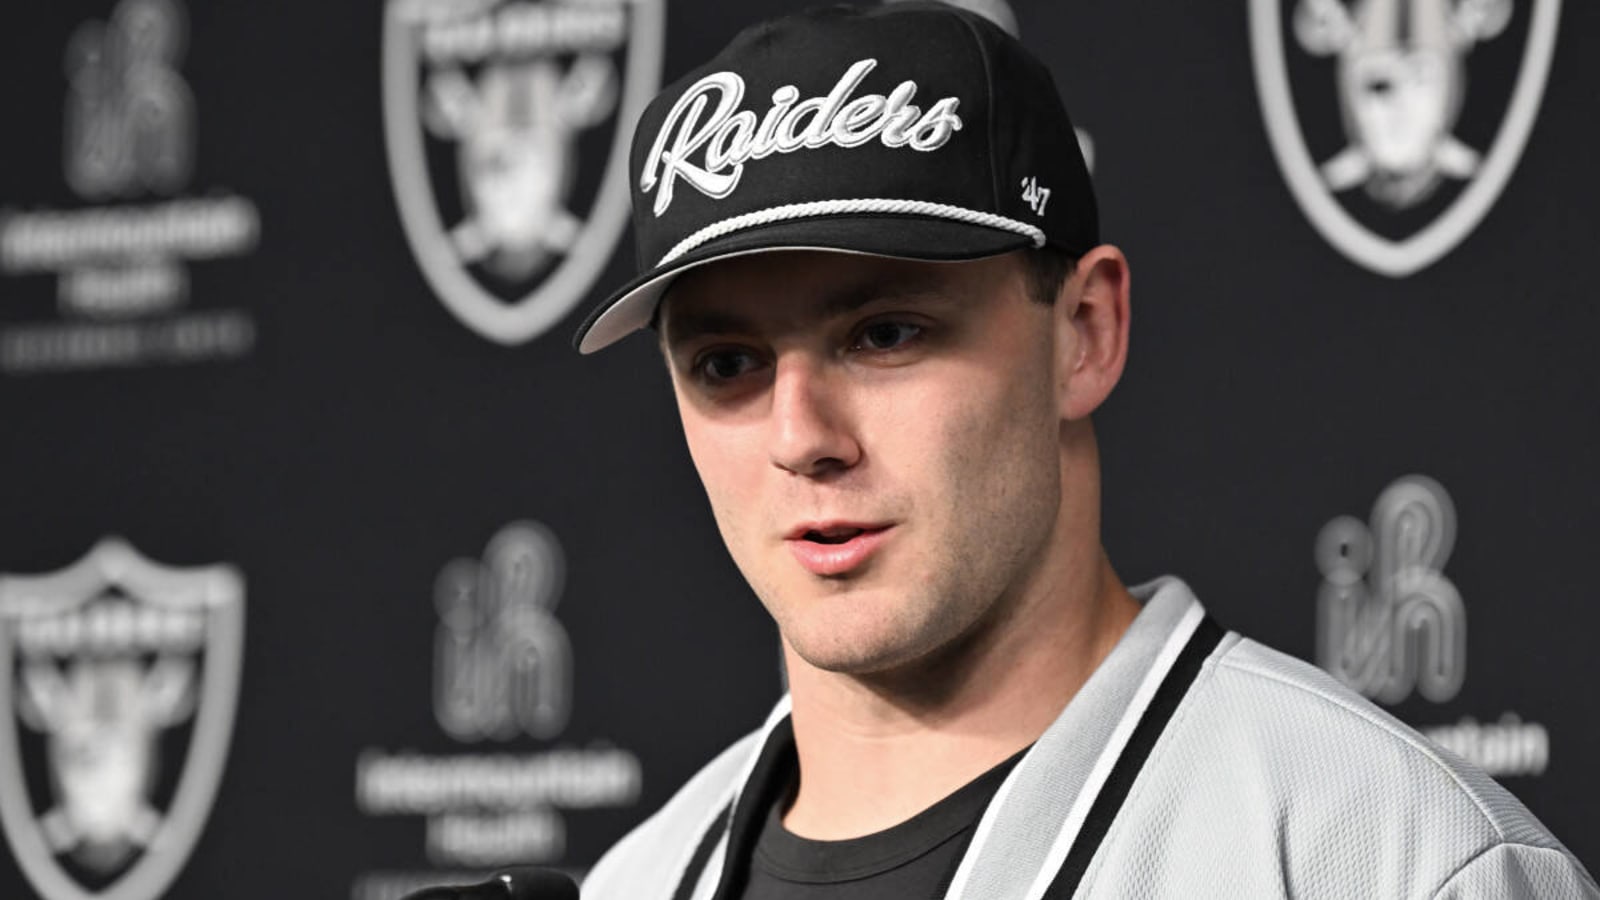 NFL Draft anaylst believes Brock Bowers landing with the Raiders offers him a unique opportunity